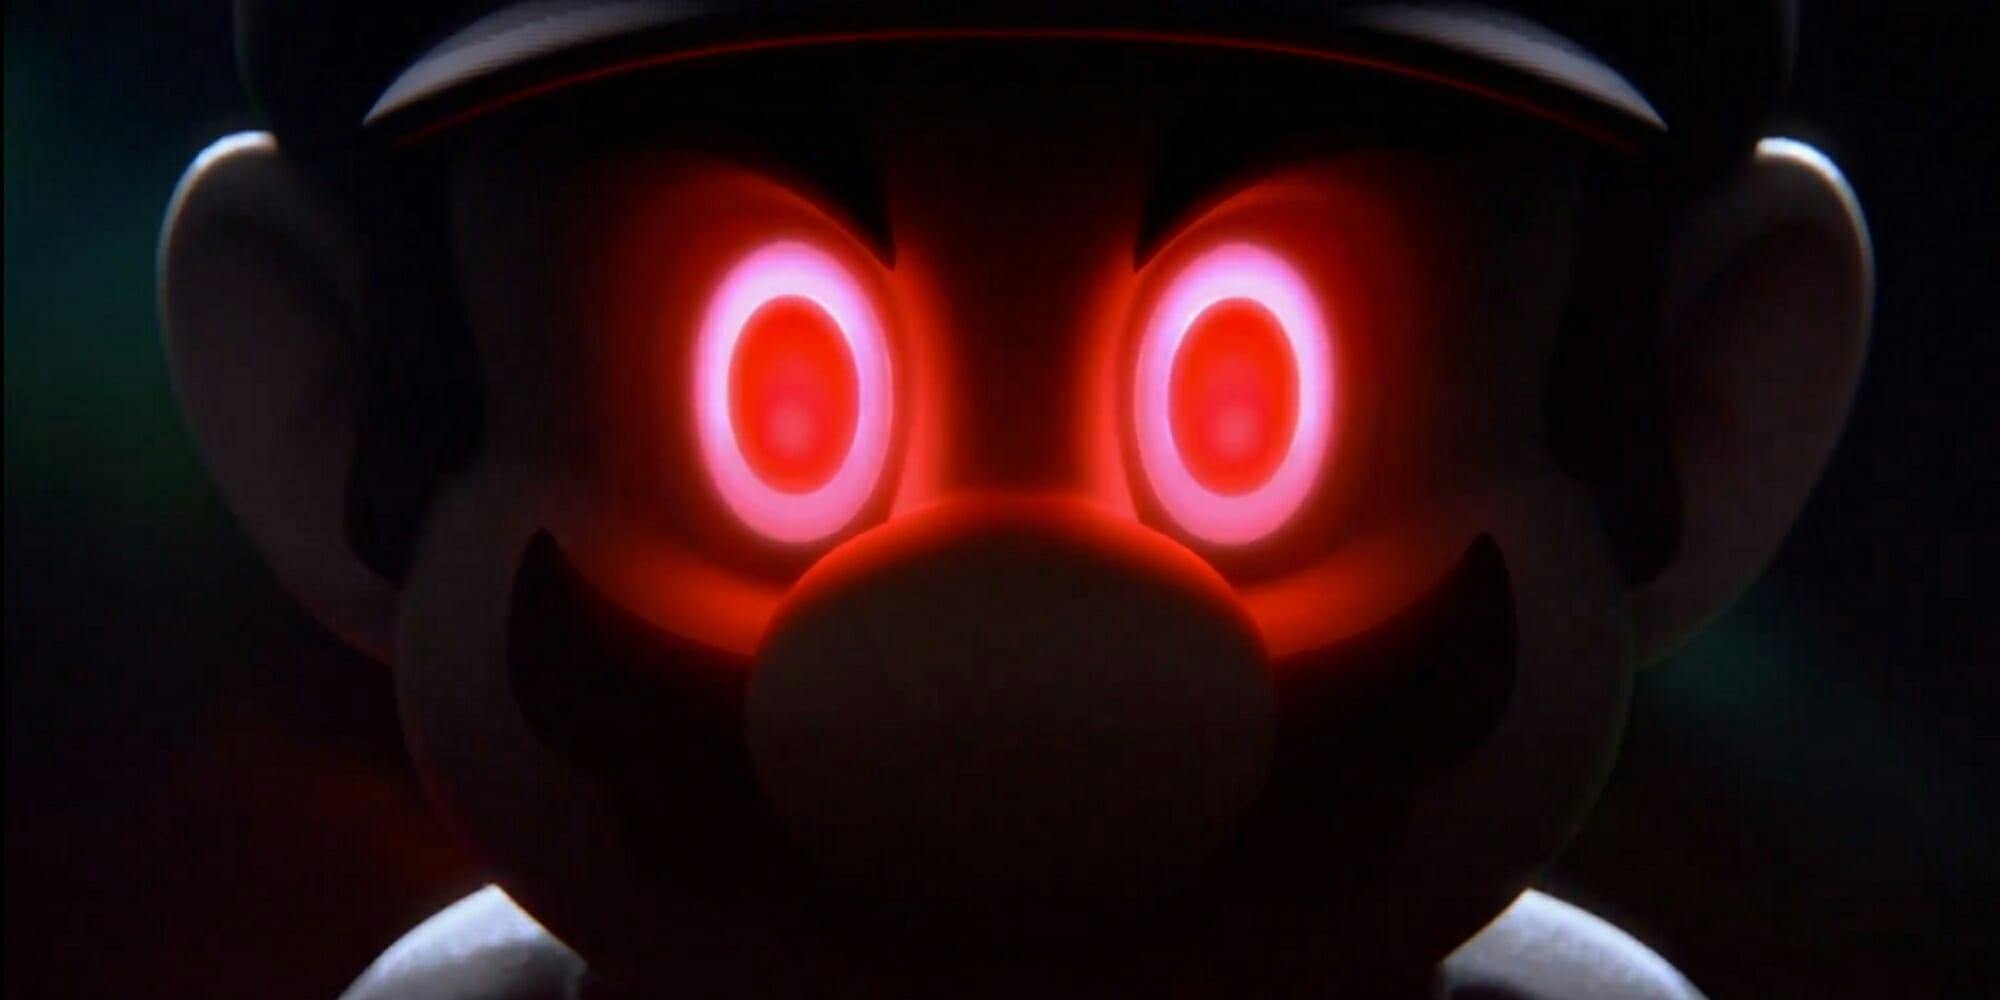 A new Smash Bros character is getting revealed tomorrow morning; I'm  praying for our crazy boy to finally make it. I might actually cry if it's  him (it's been a tough month